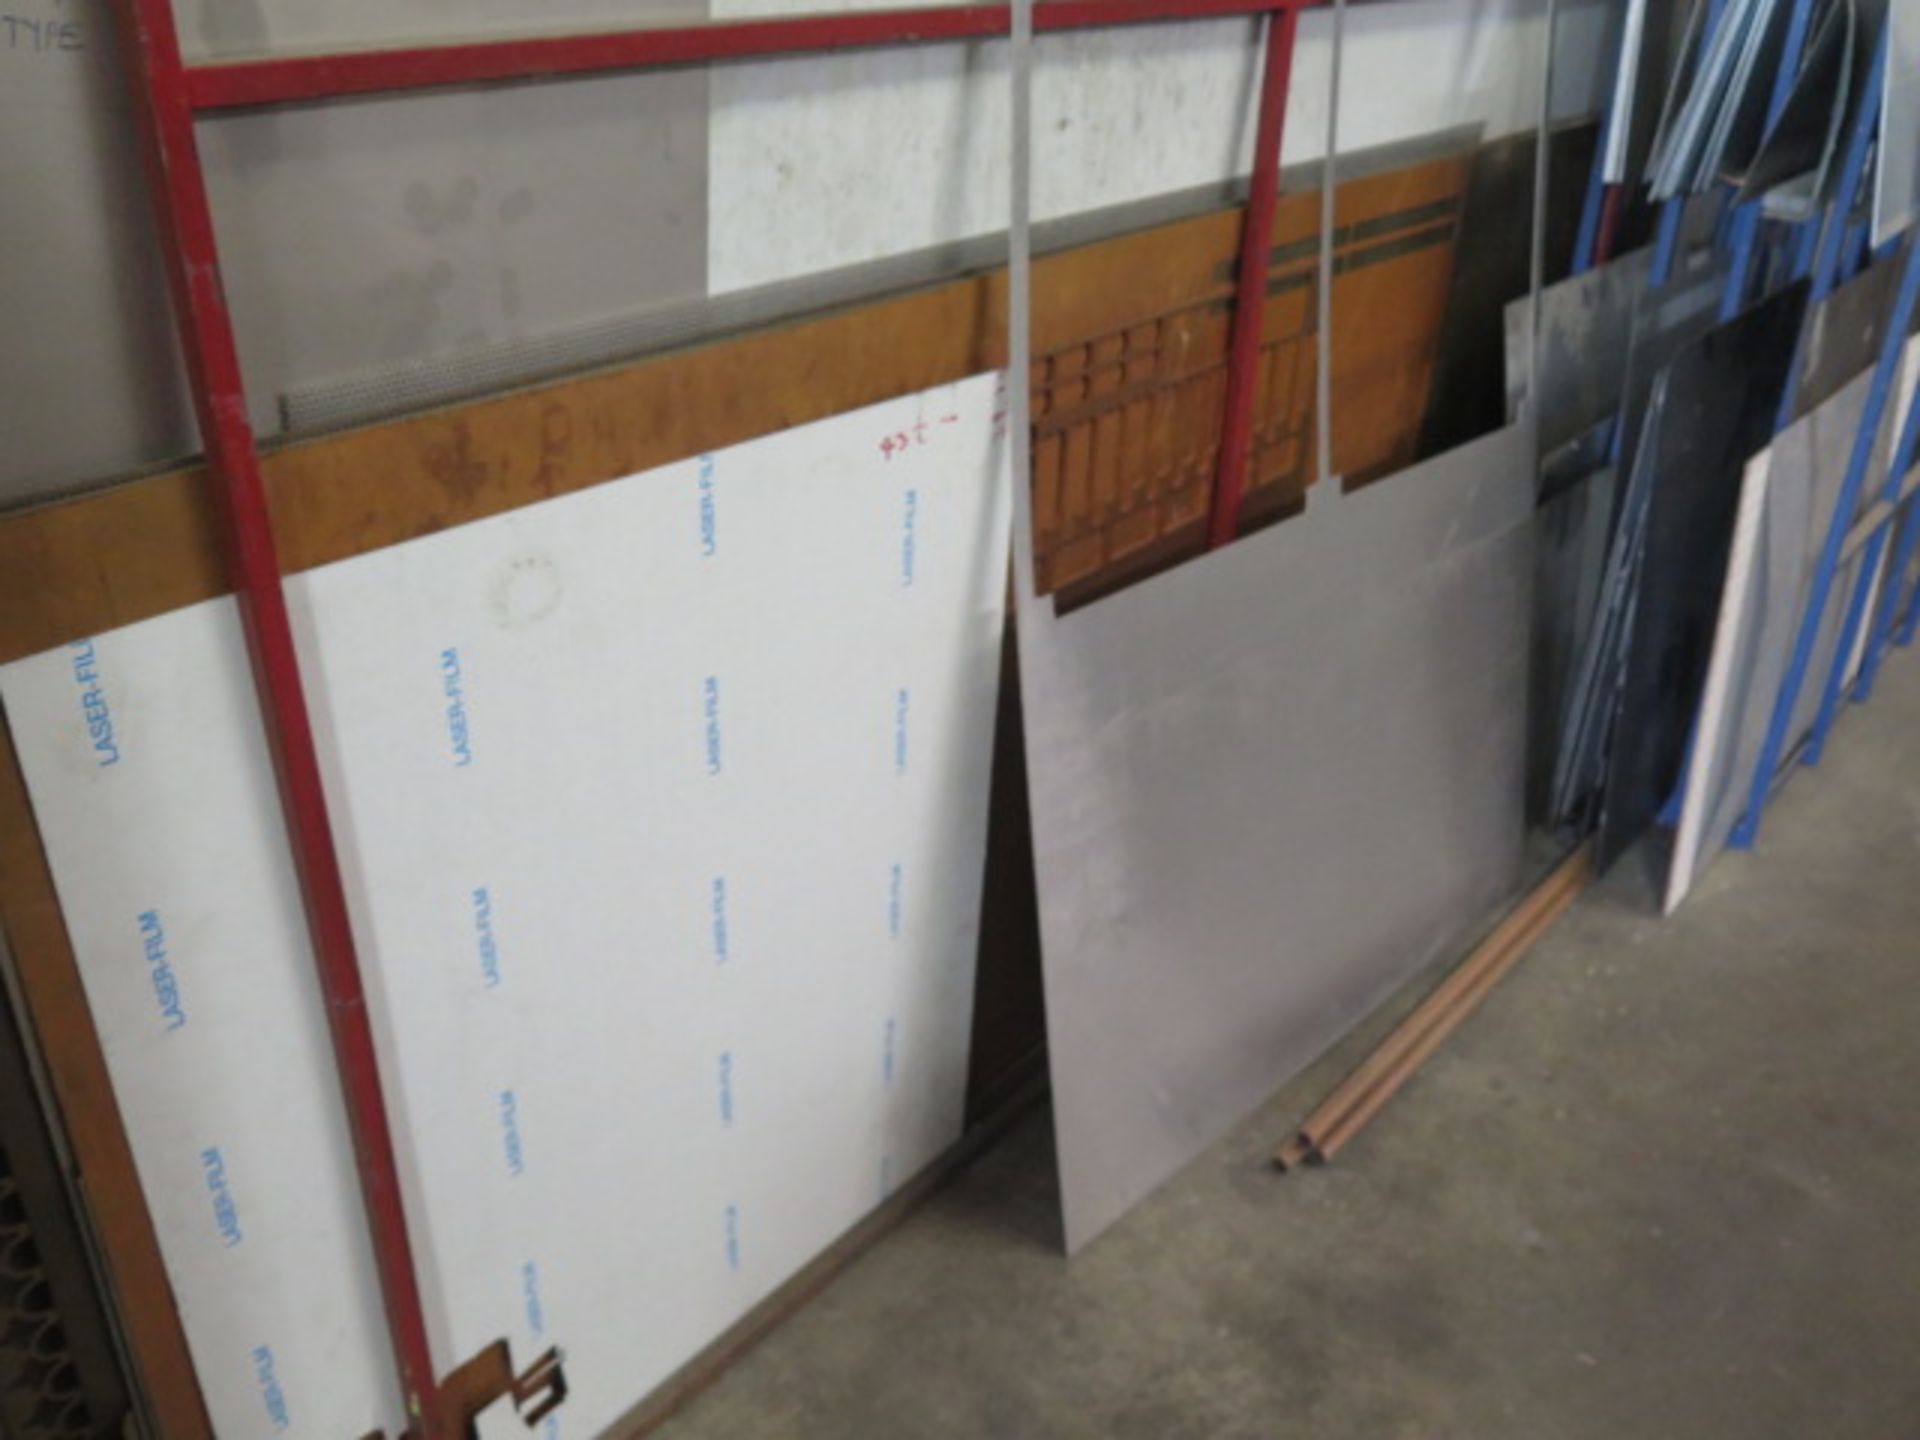 Aluminum, Copper,v Stainless and Cold Roll Sheet Stock w/ Rack (SOLD AS-IS - NO WARRANTY) - Image 4 of 8